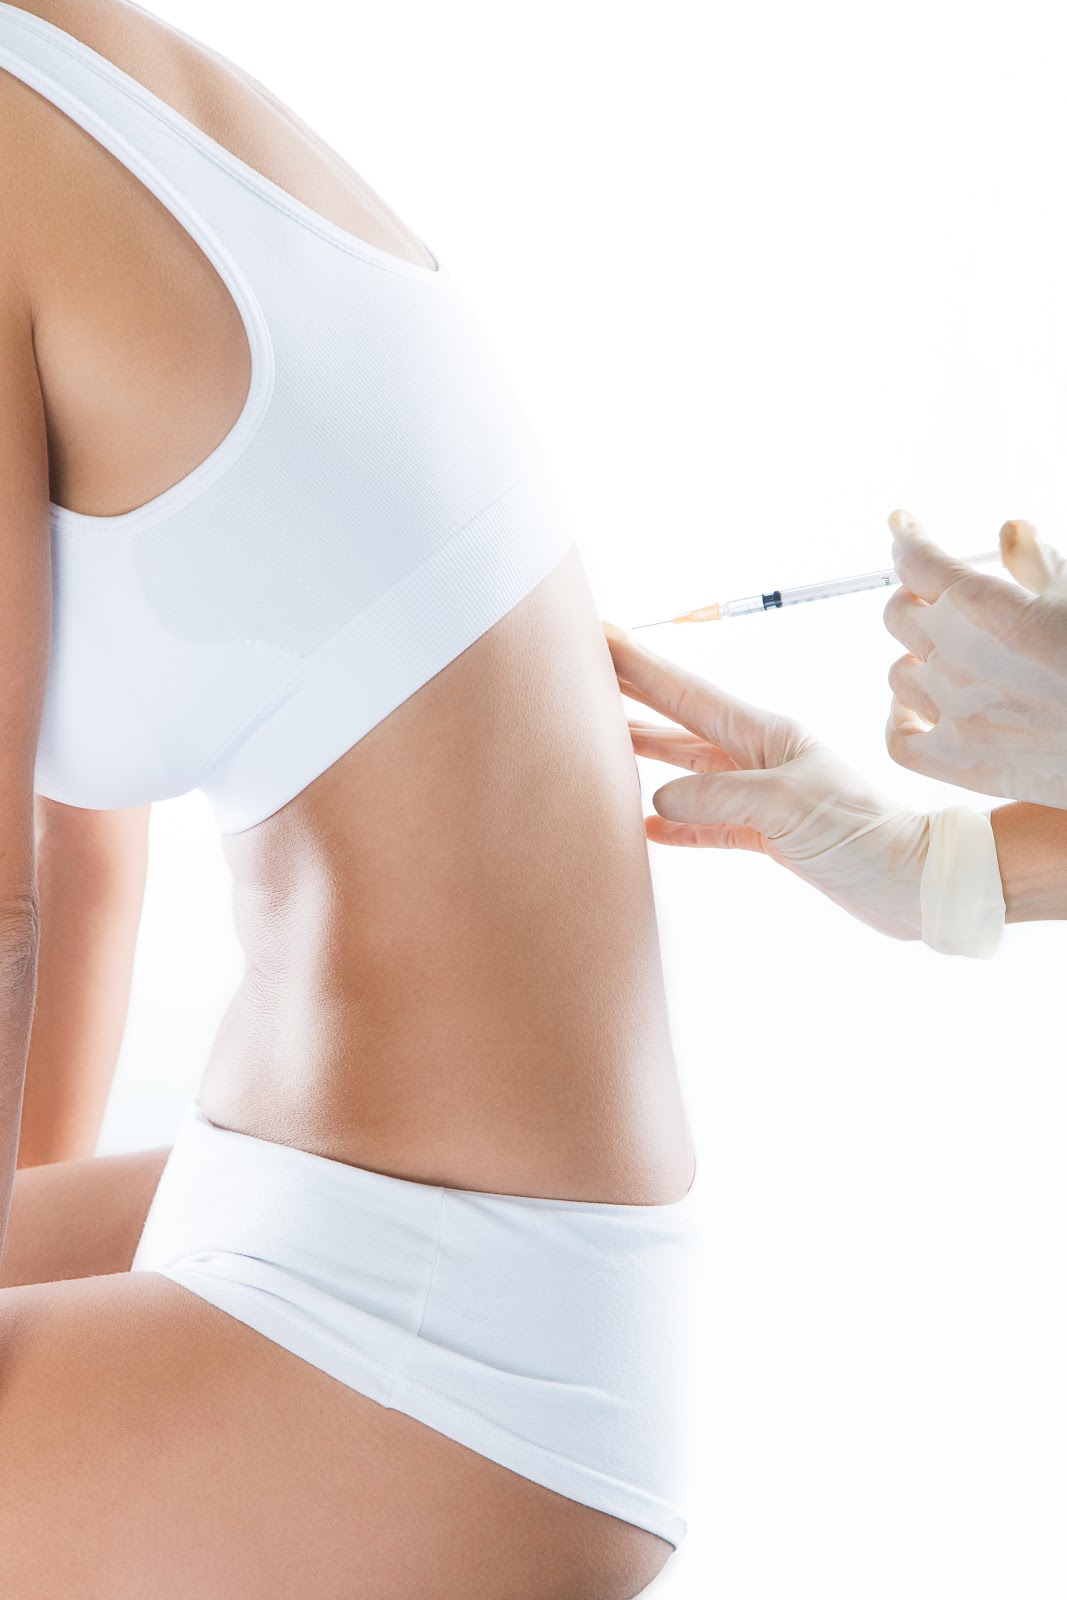 Injections for lower back pain